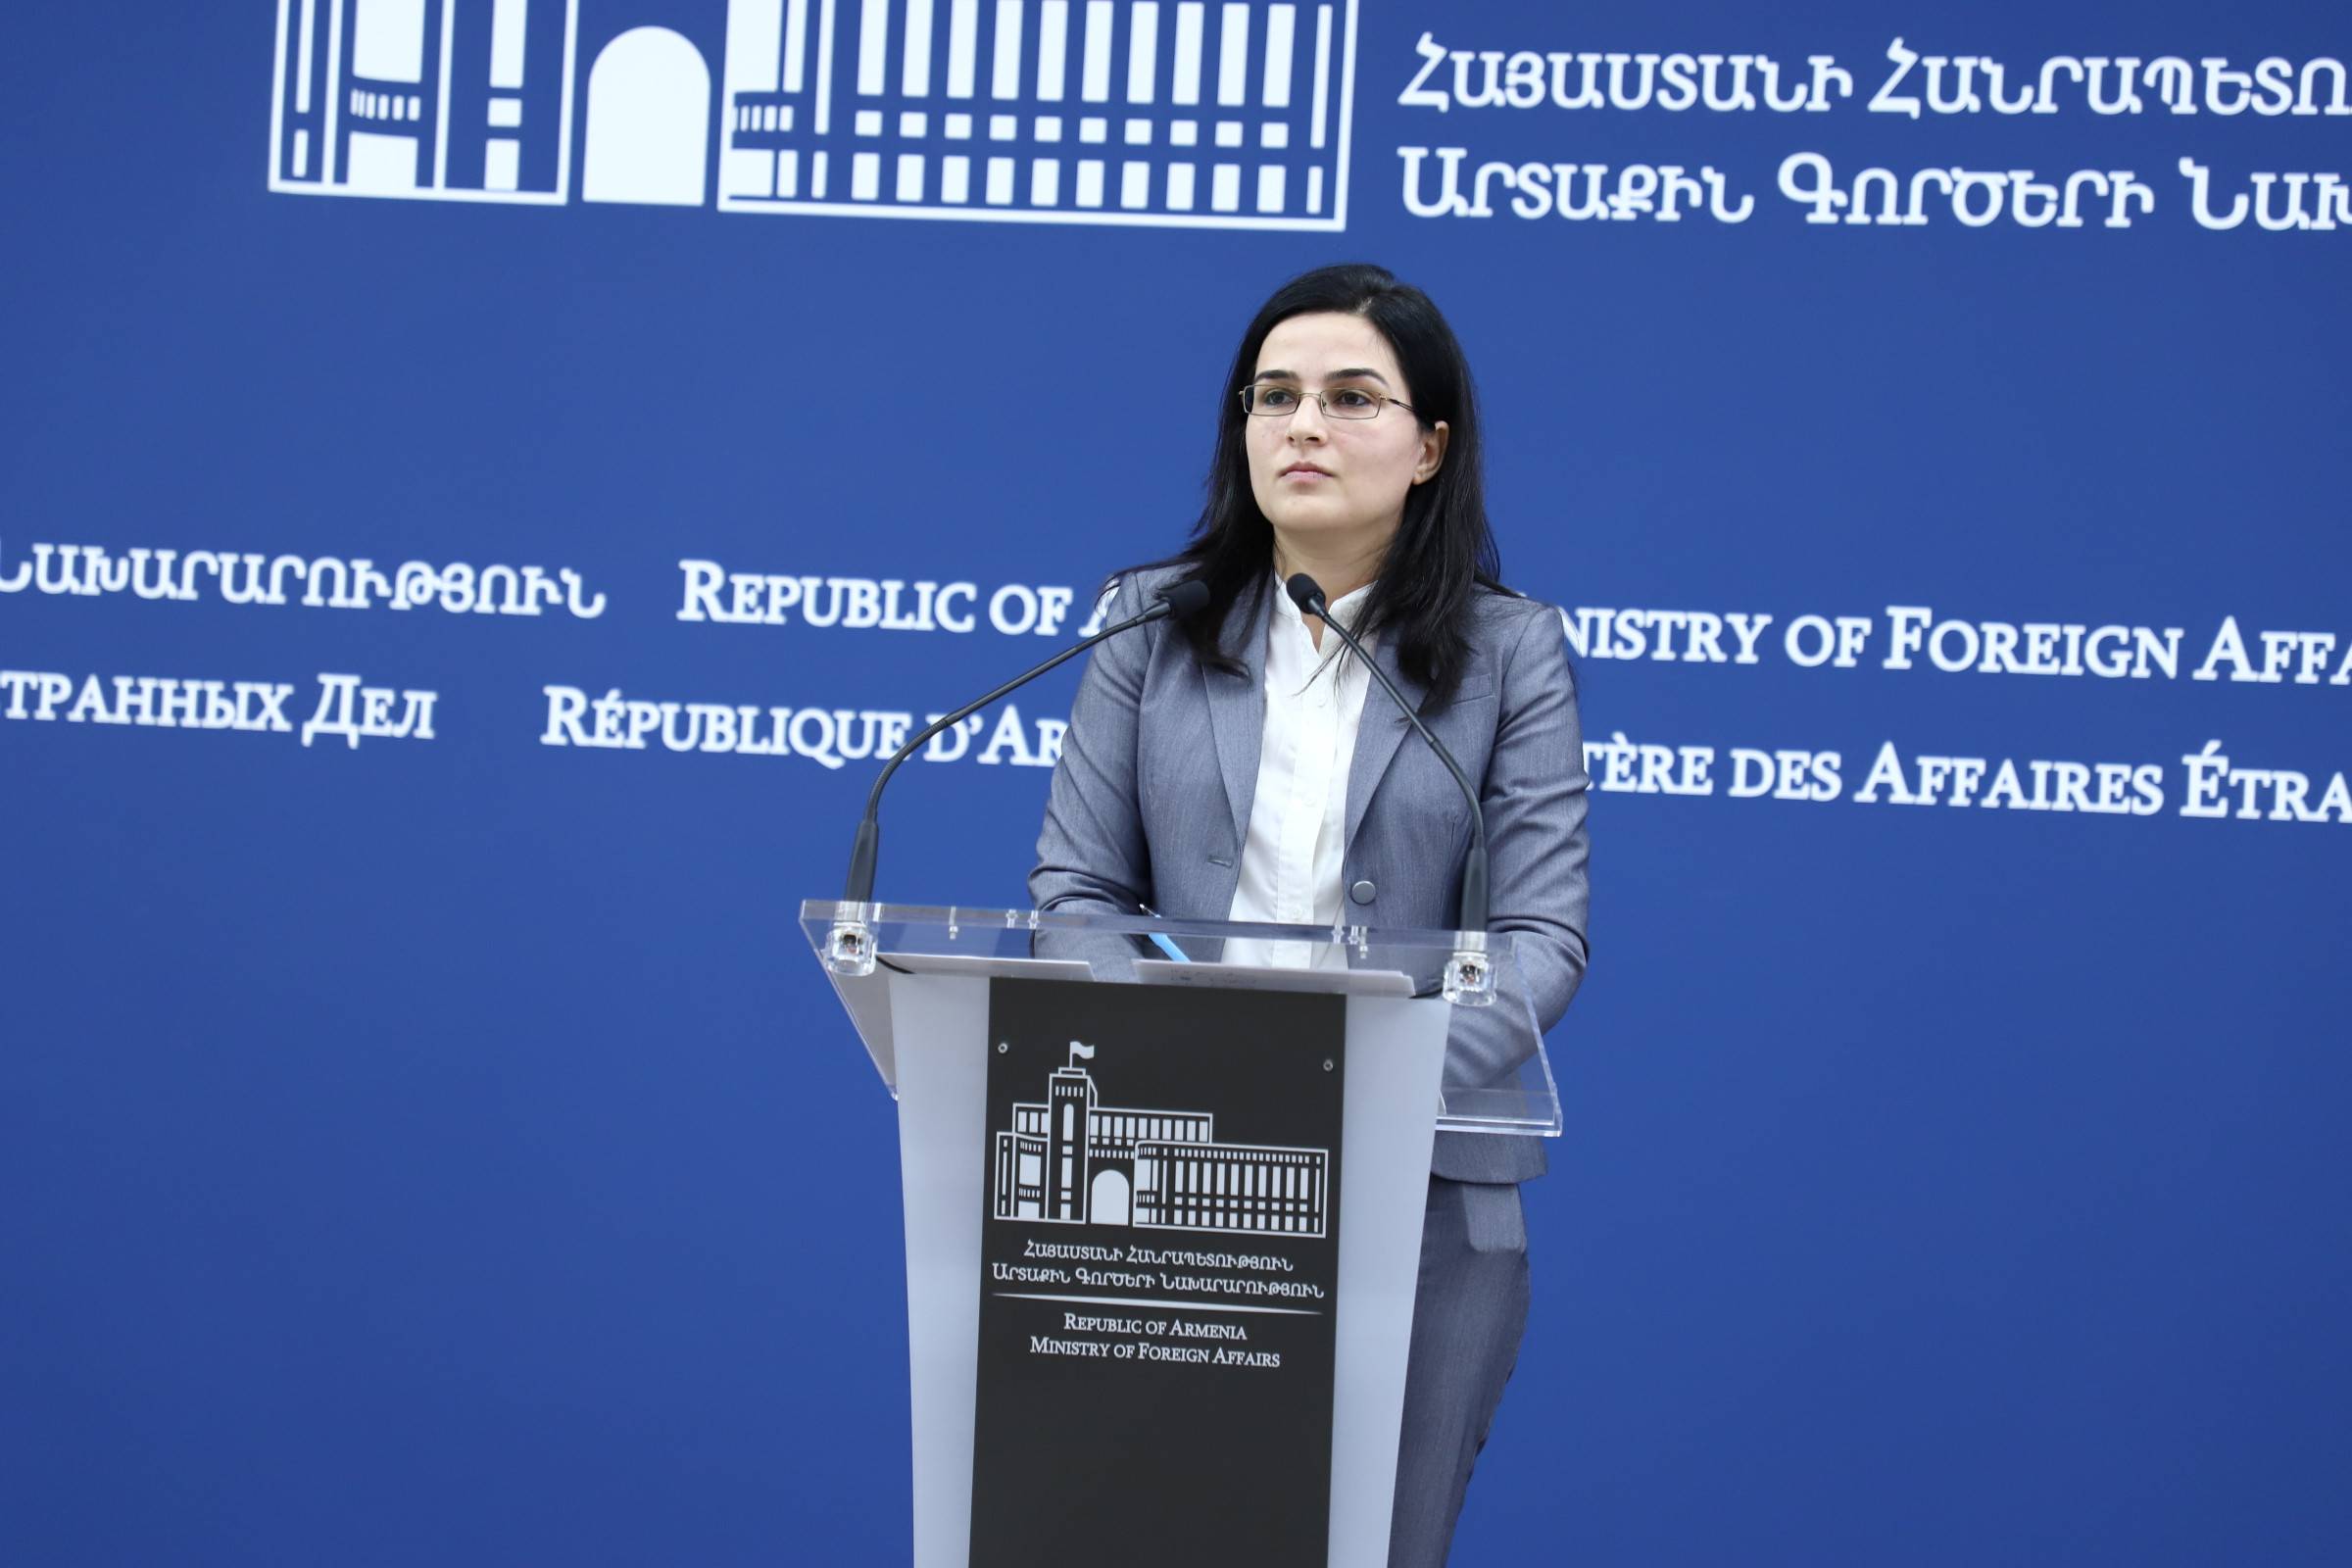 Comment by MFA Spokesperson on the Nagorno-Karabakh peace process